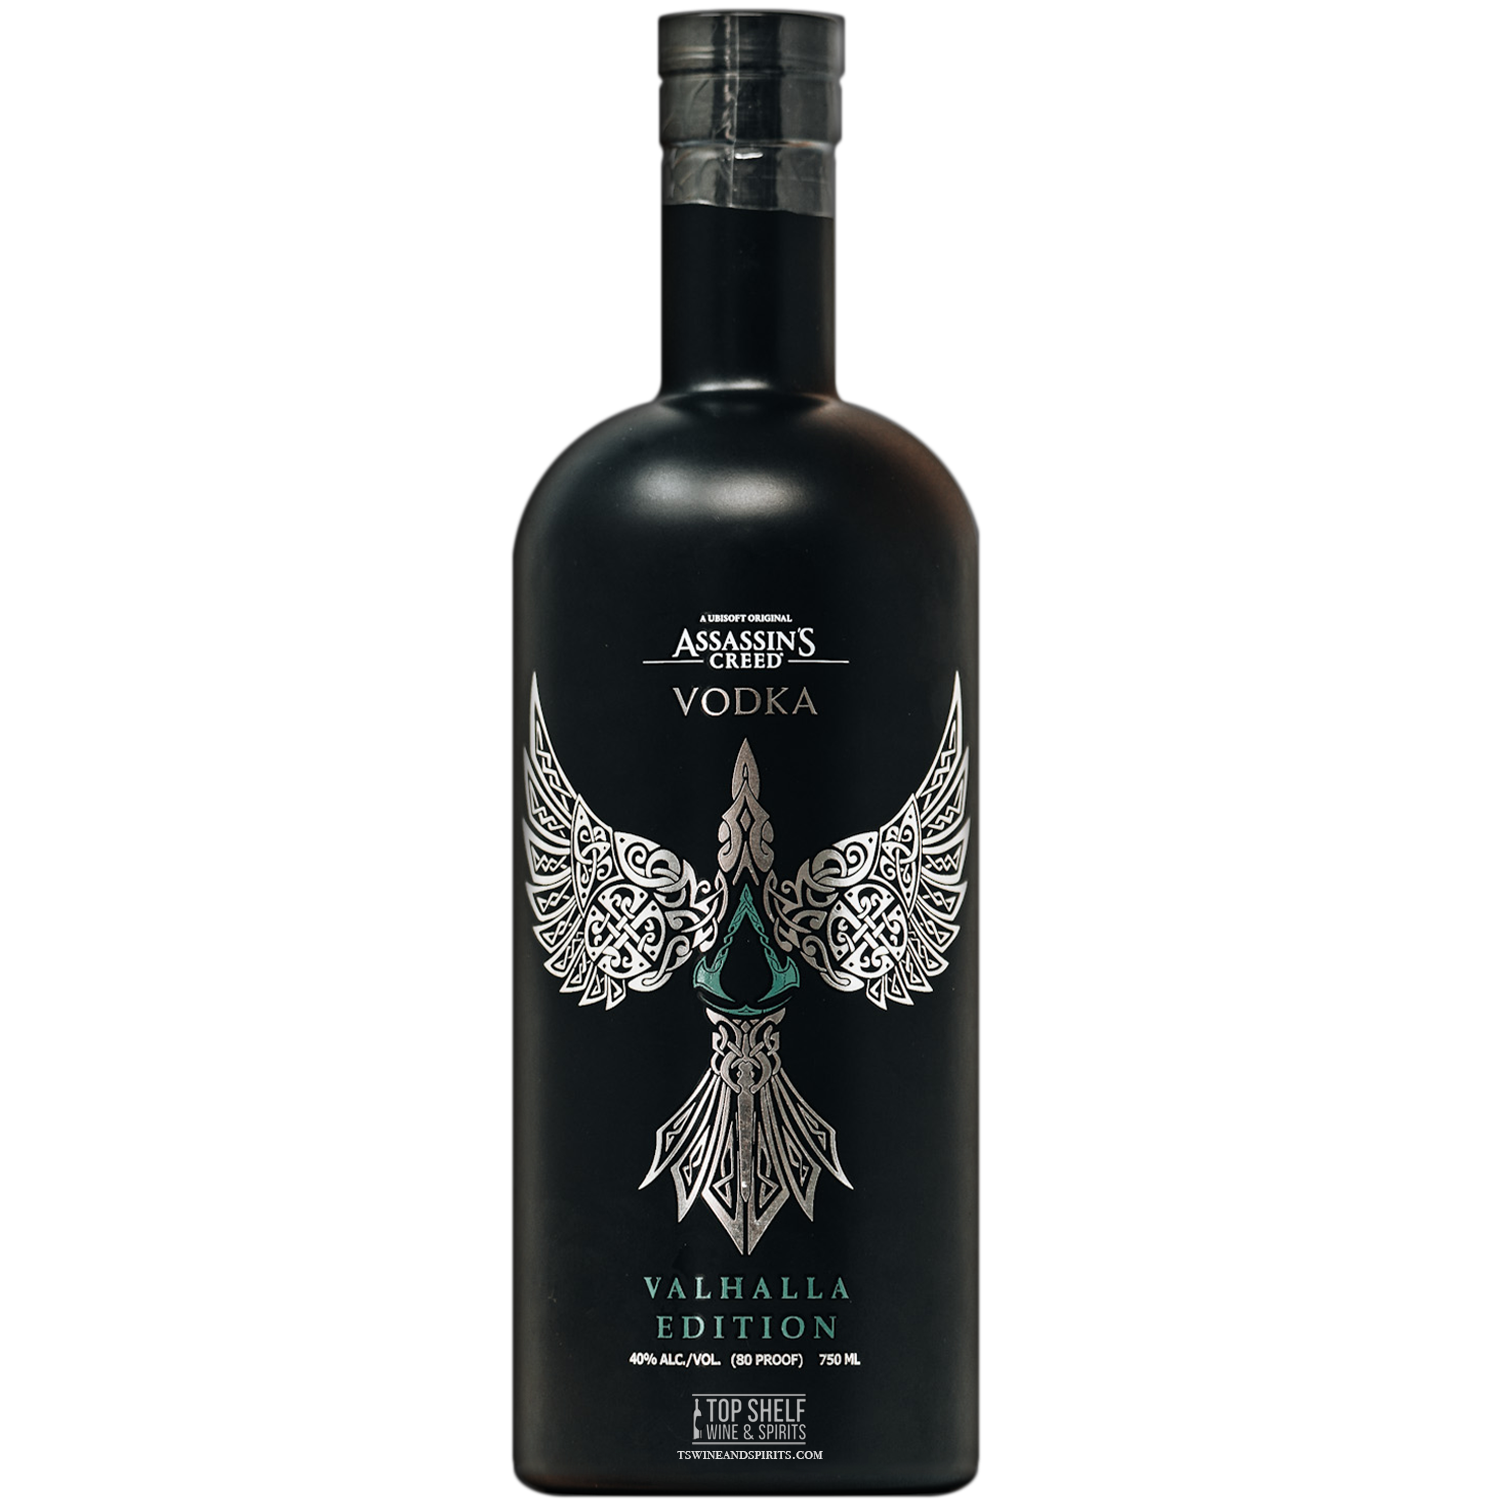 Assassin's Creed Valhalla Edition Vodka (Collector's Bottle)